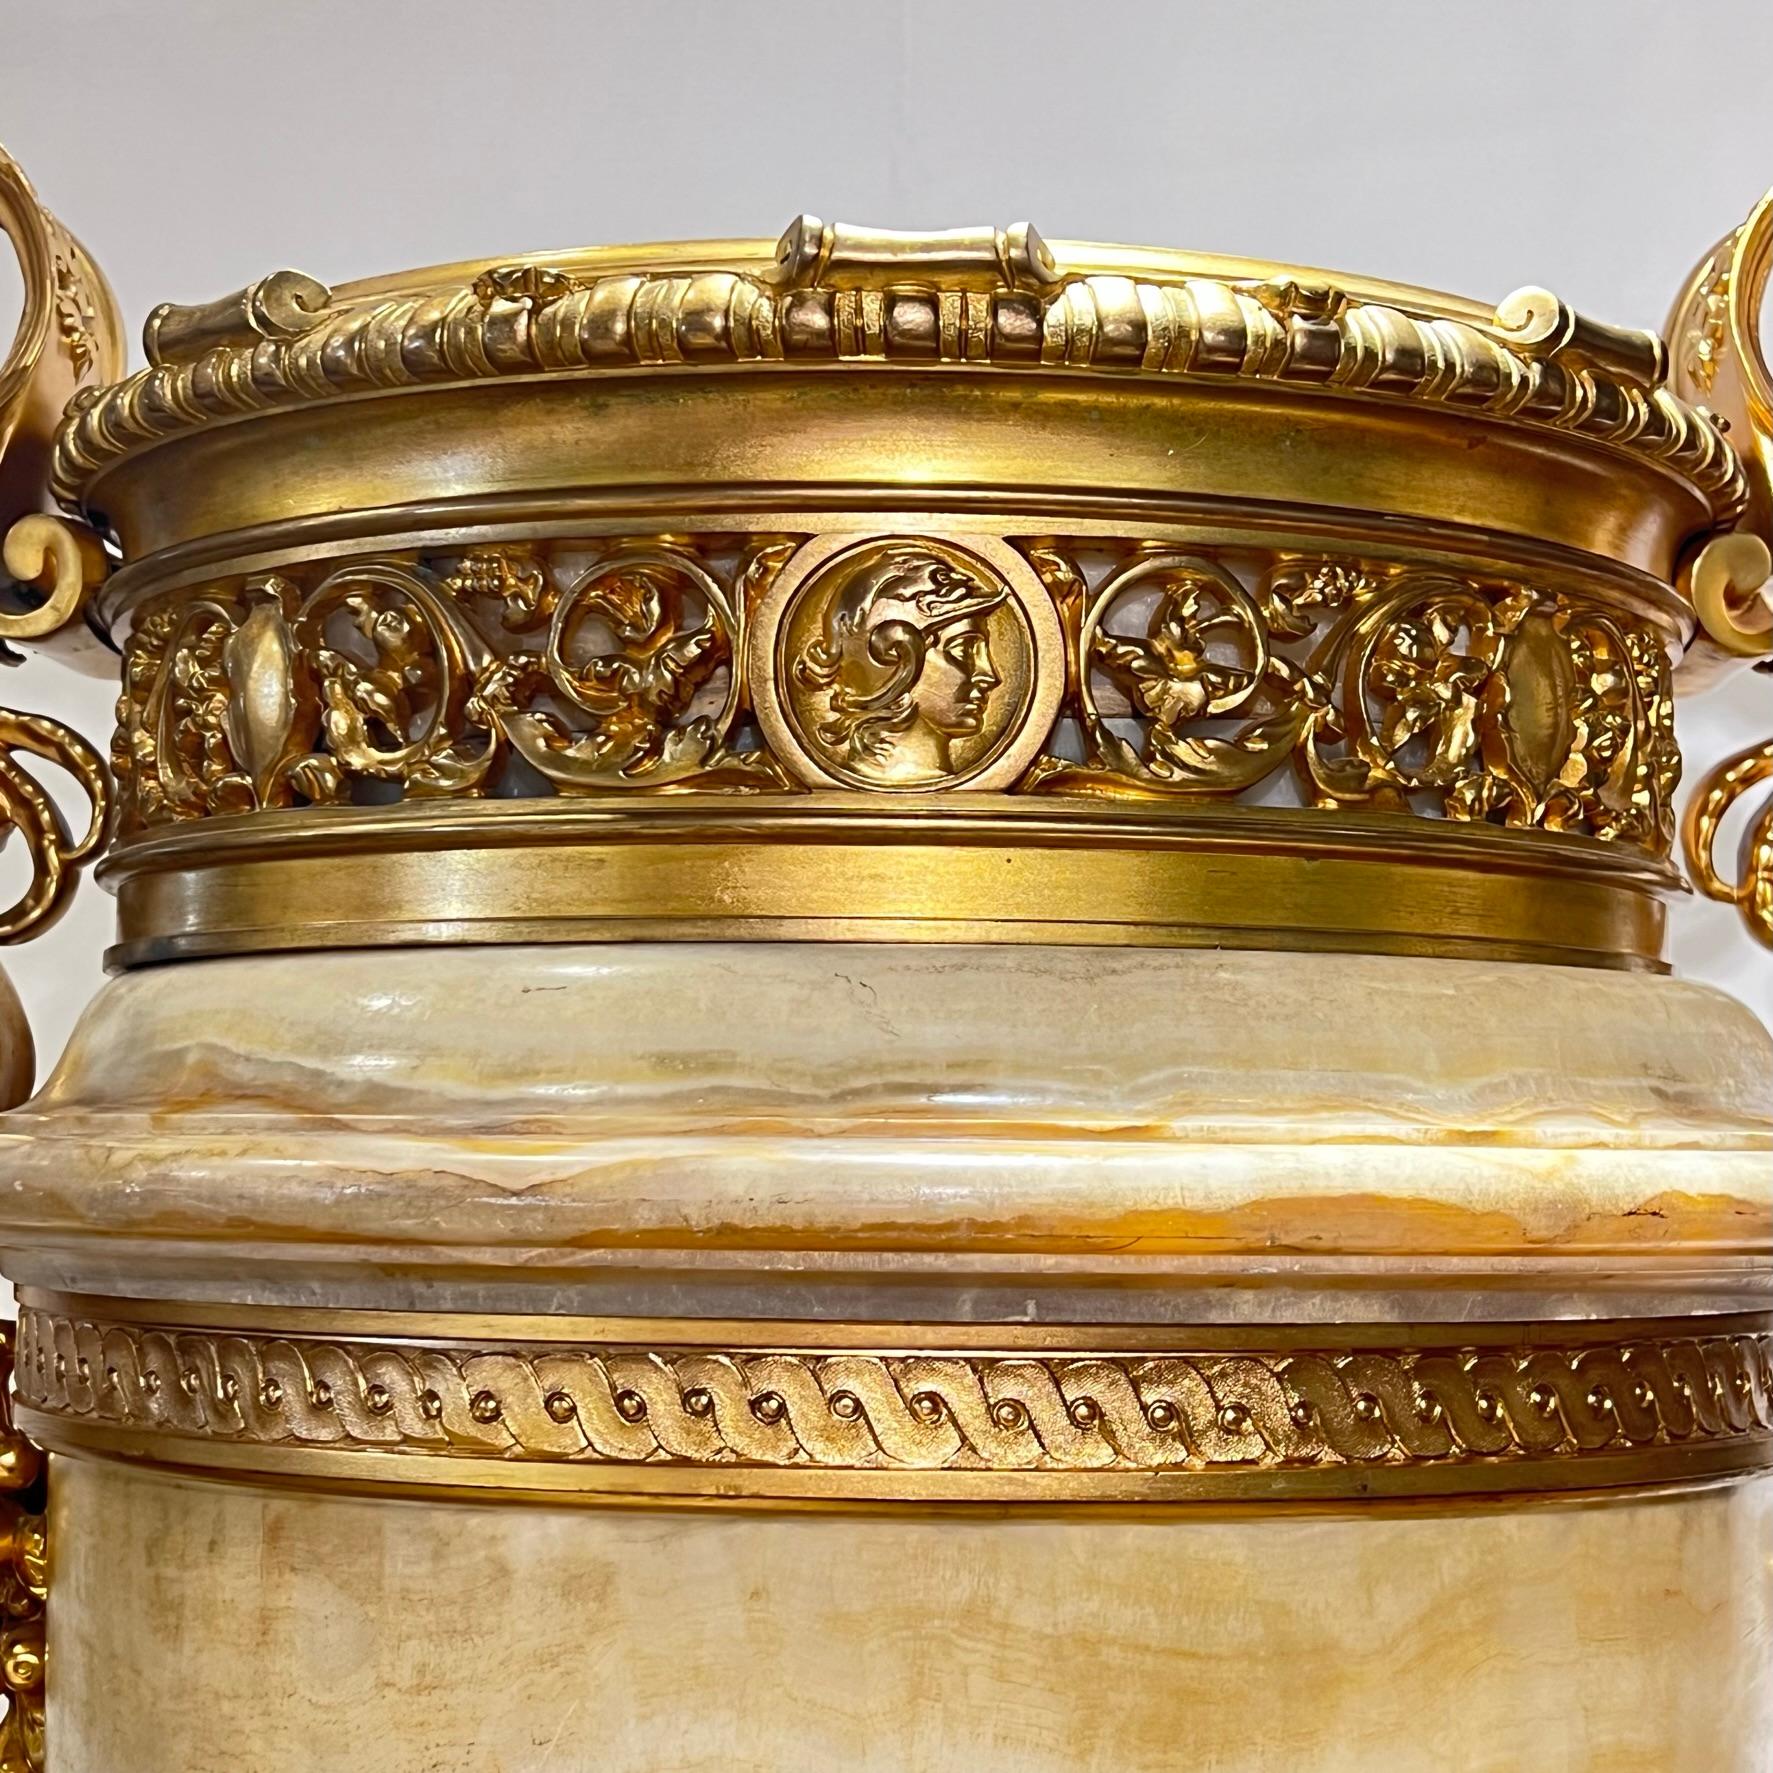 Monumental 19th Century French Neoclassical Onyx and Gilt Bronze Vase For Sale 11